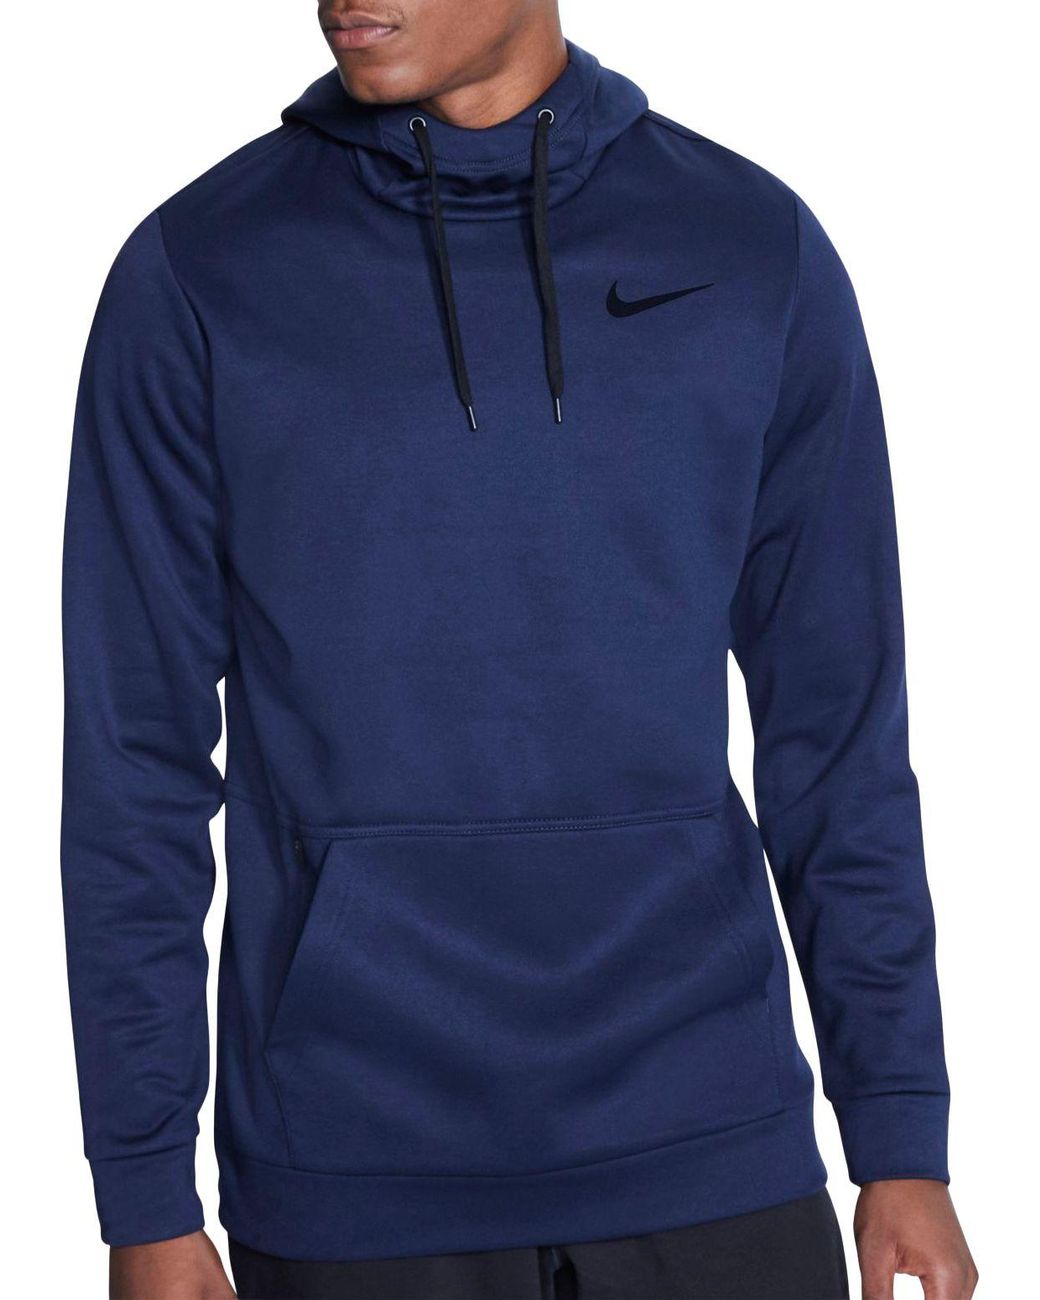 Nike Therma Training Hoodie in Blue for Men - Lyst